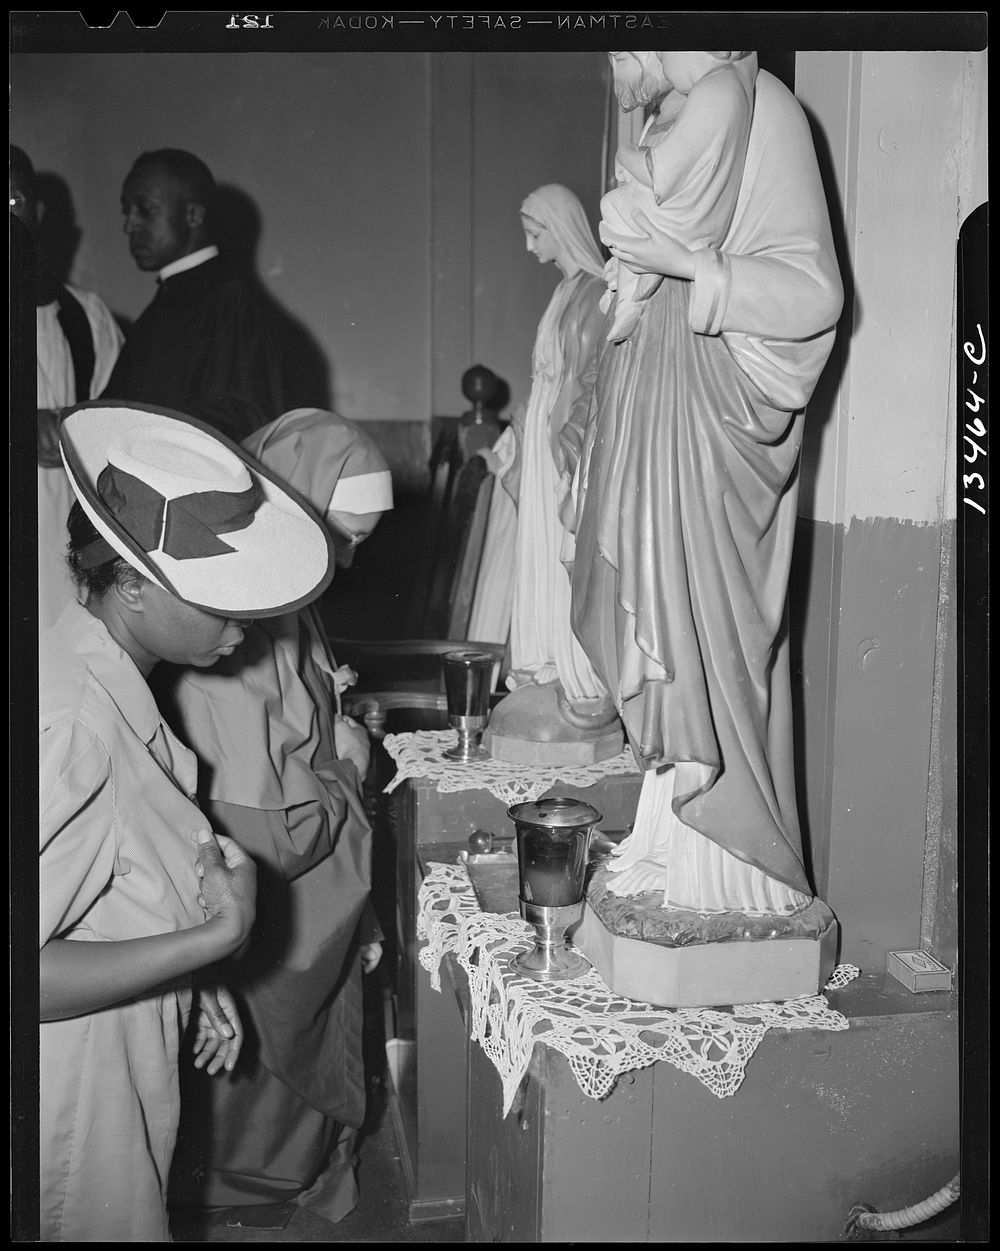 Washington, D.C. Worshippers before the altar in the St. Martin's Spiritual Church. Sourced from the Library of Congress.